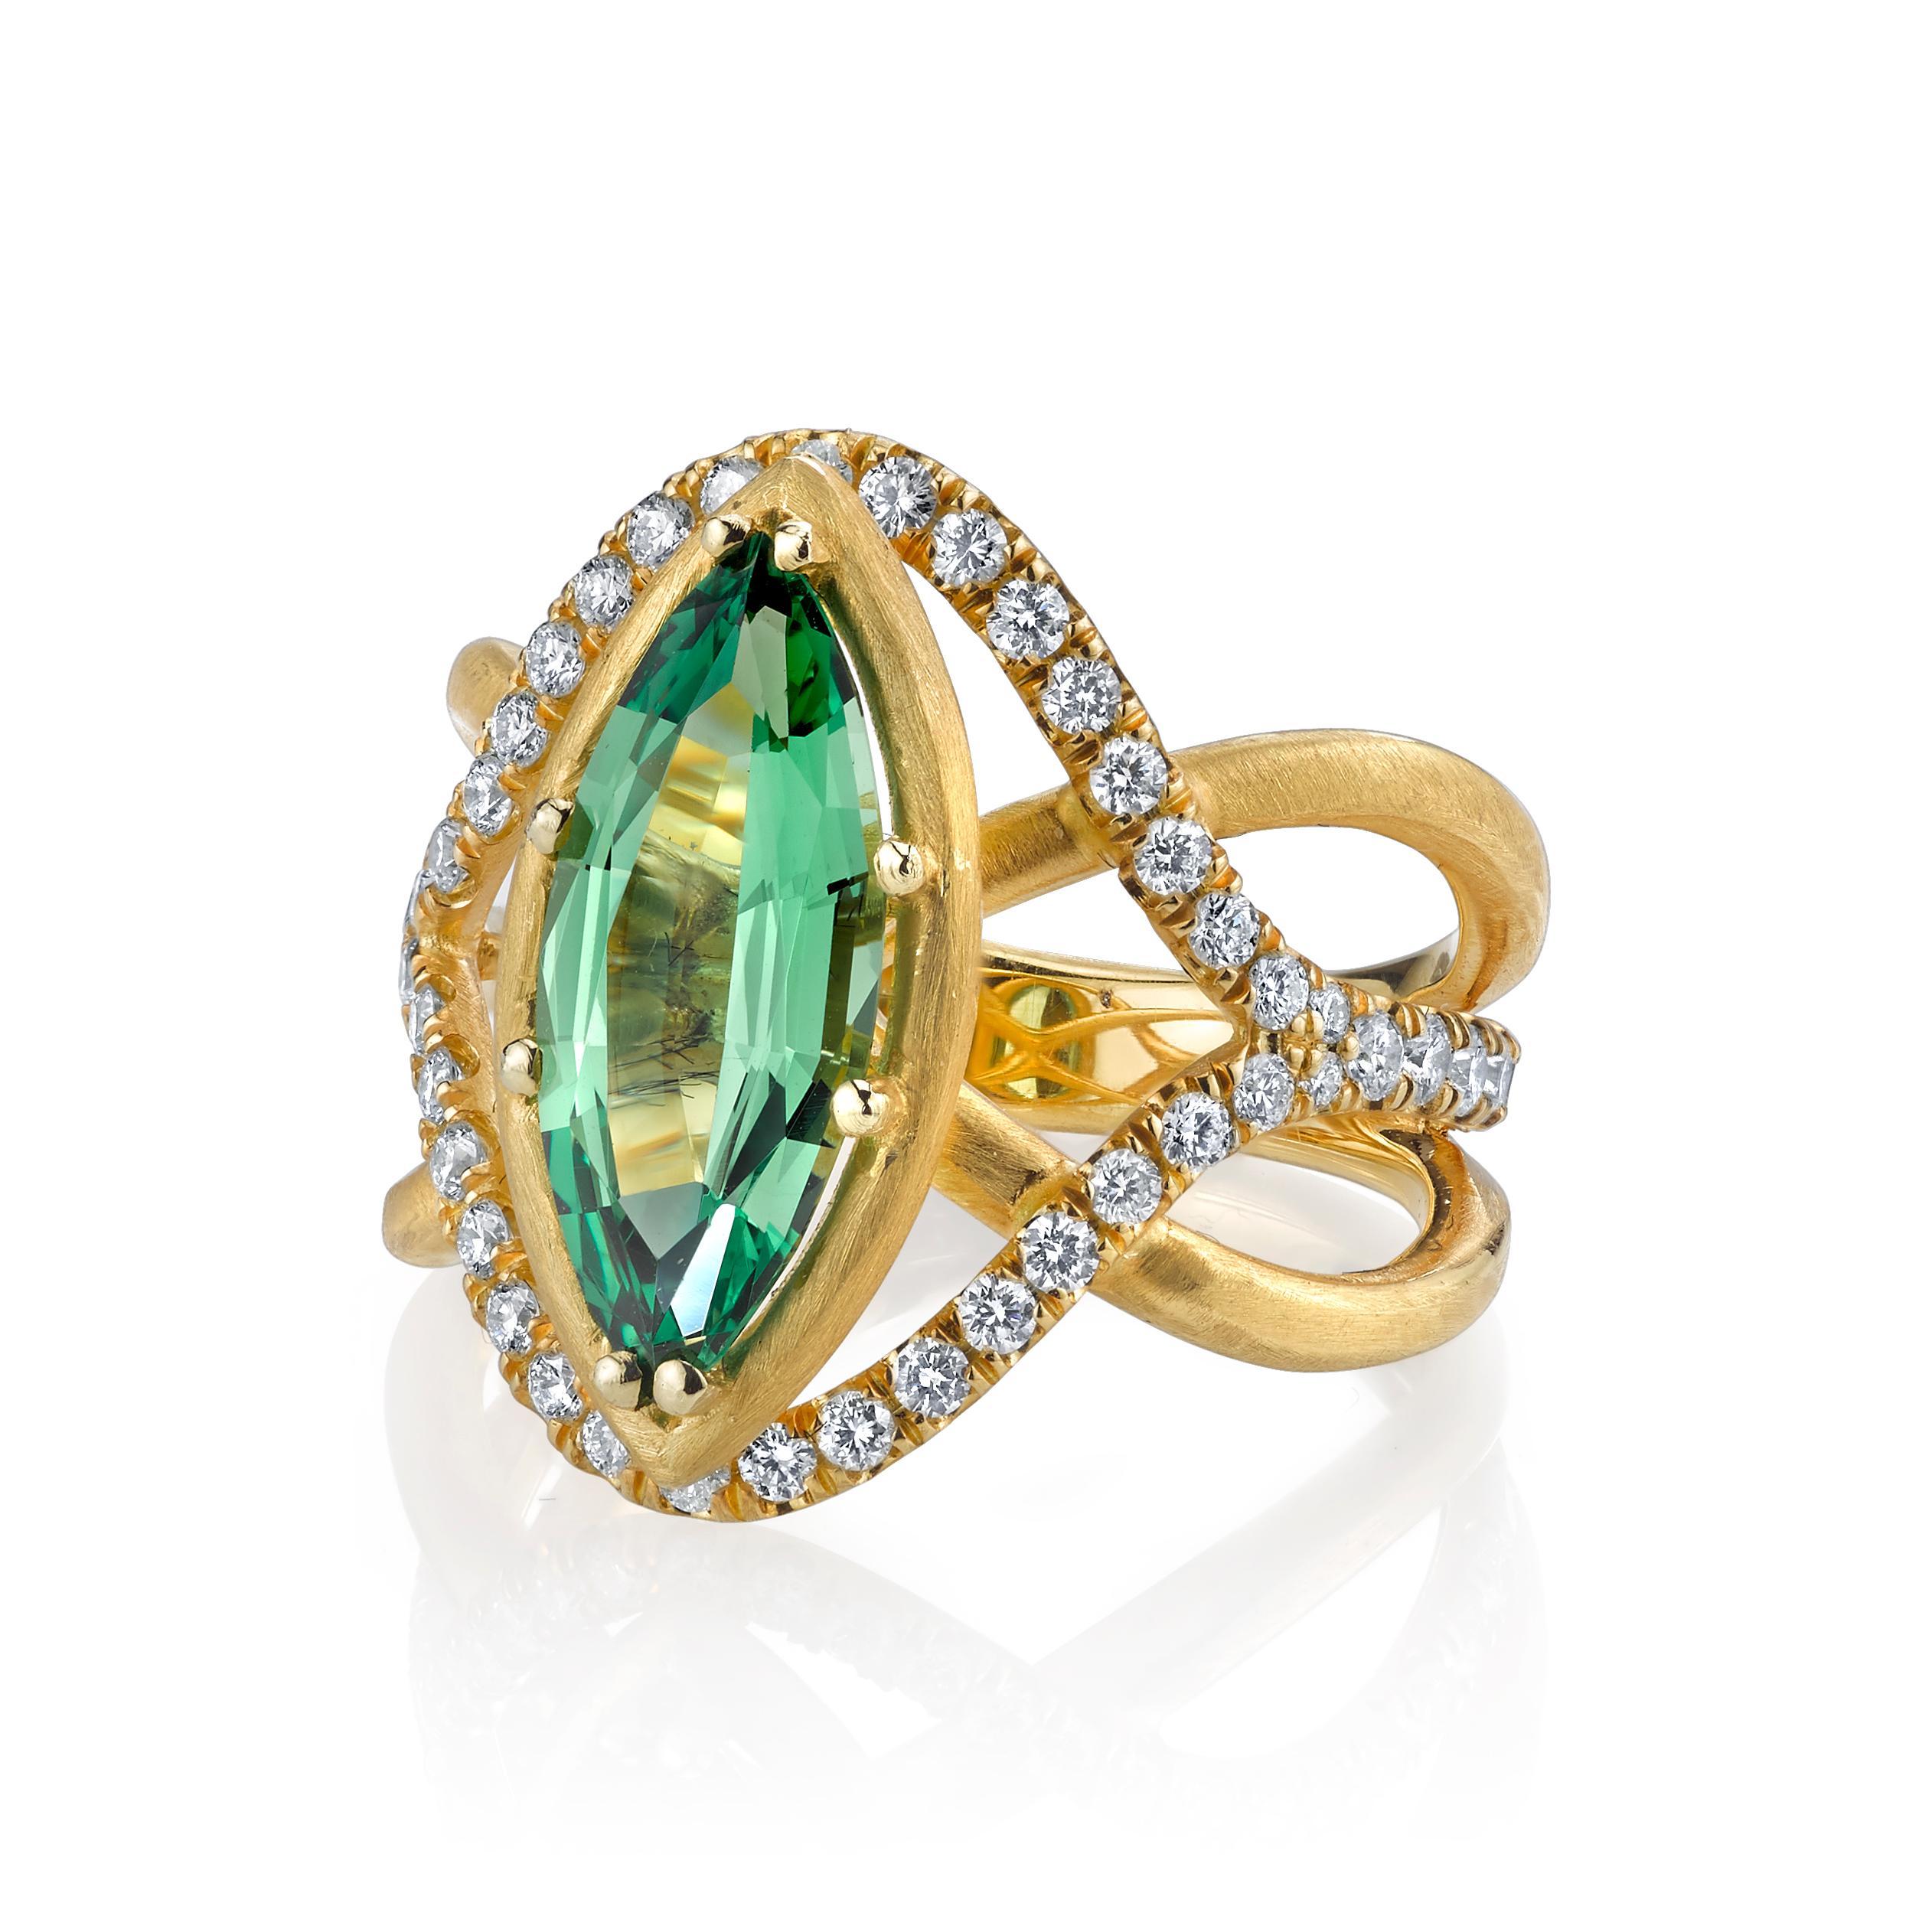 This elegant 18k yellow gold ring looks so sophisticated and refined! Artfully designed with flowing curves and beautiful from every angle, this original work of art features a 2.95 carat bright and vivid tsavorite green garnet in an unusual